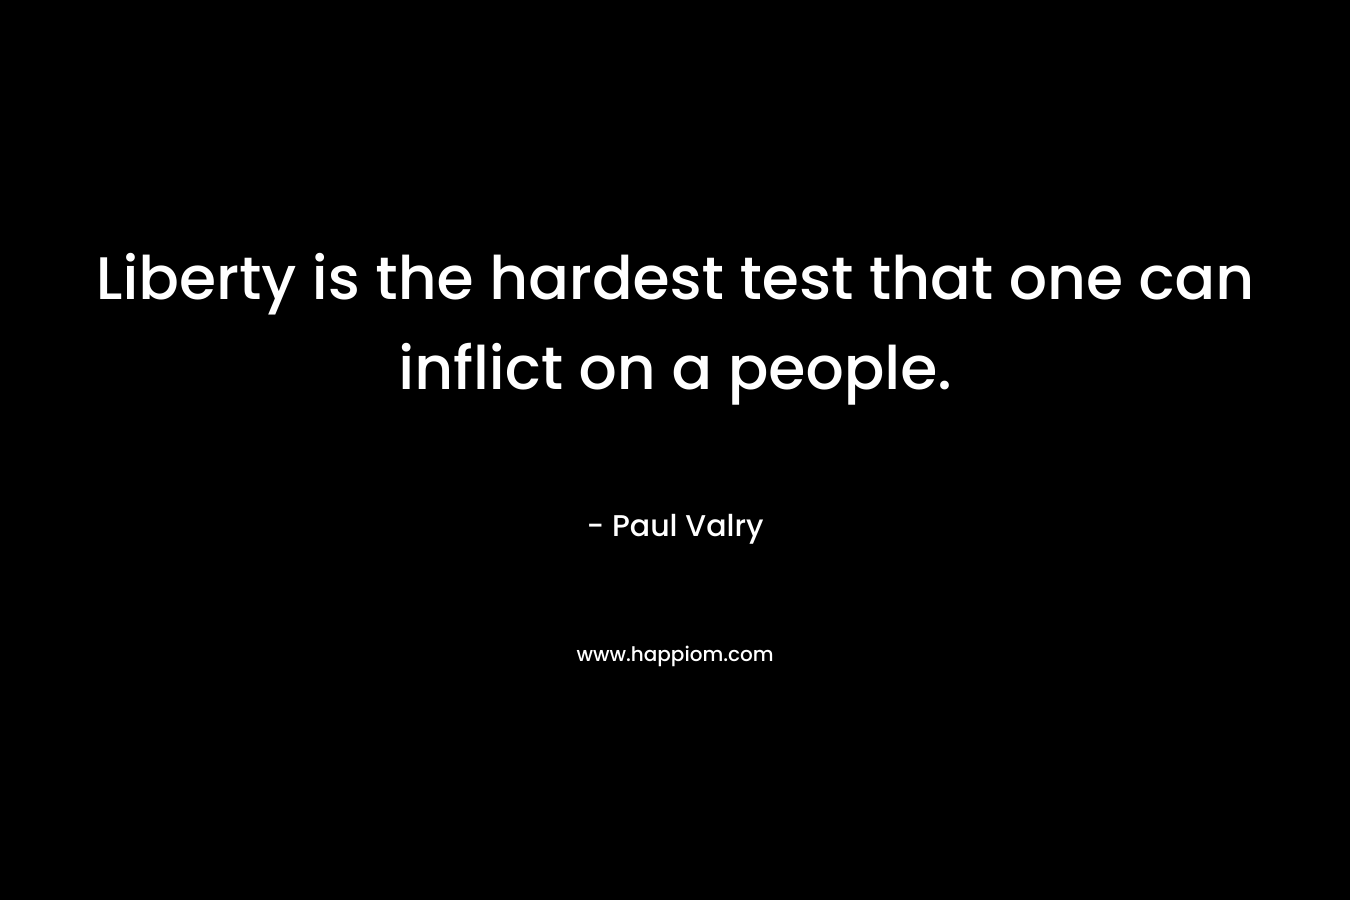 Liberty is the hardest test that one can inflict on a people.